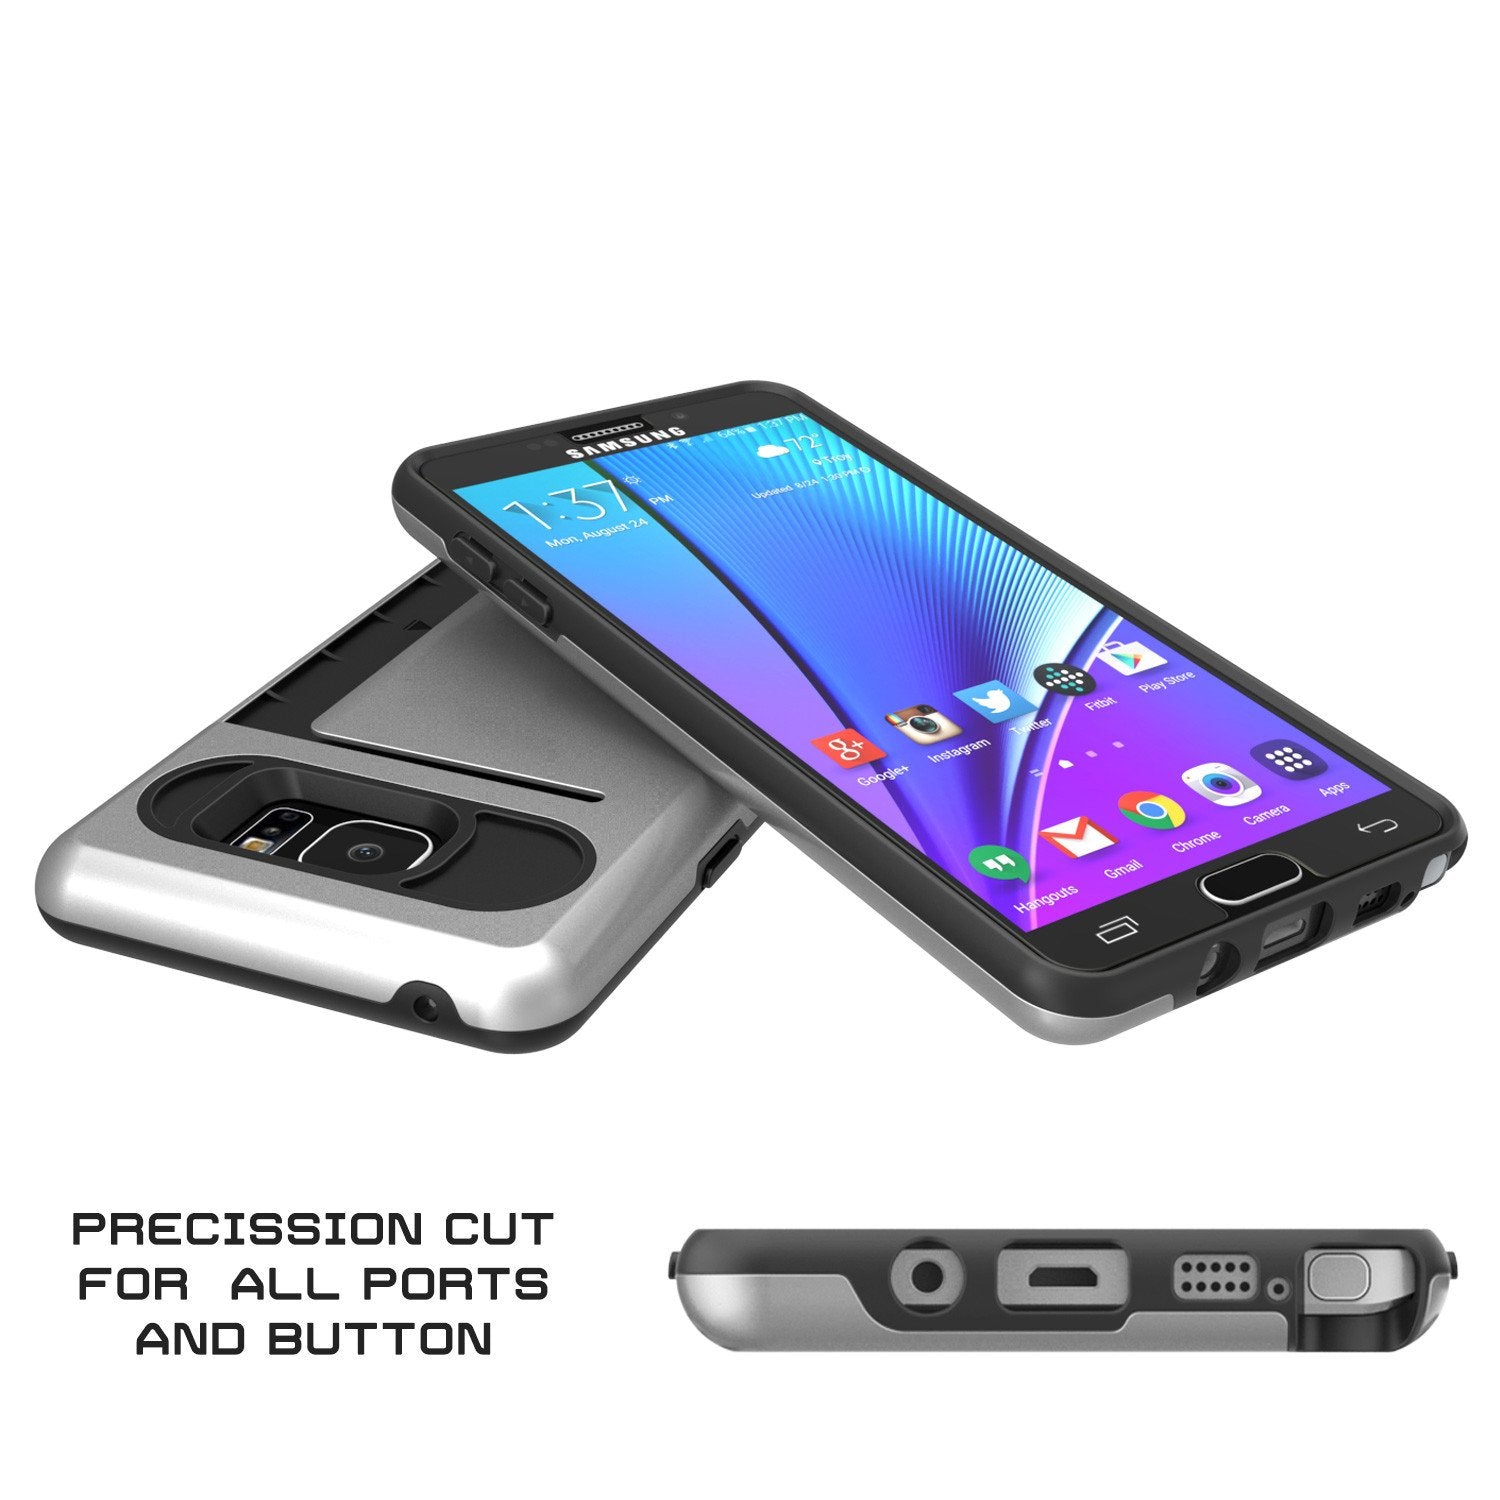 Galaxy Note 5 Case PunkCase CLUTCH Silver Series Slim Armor Soft Cover Case w/ Tempered Glass